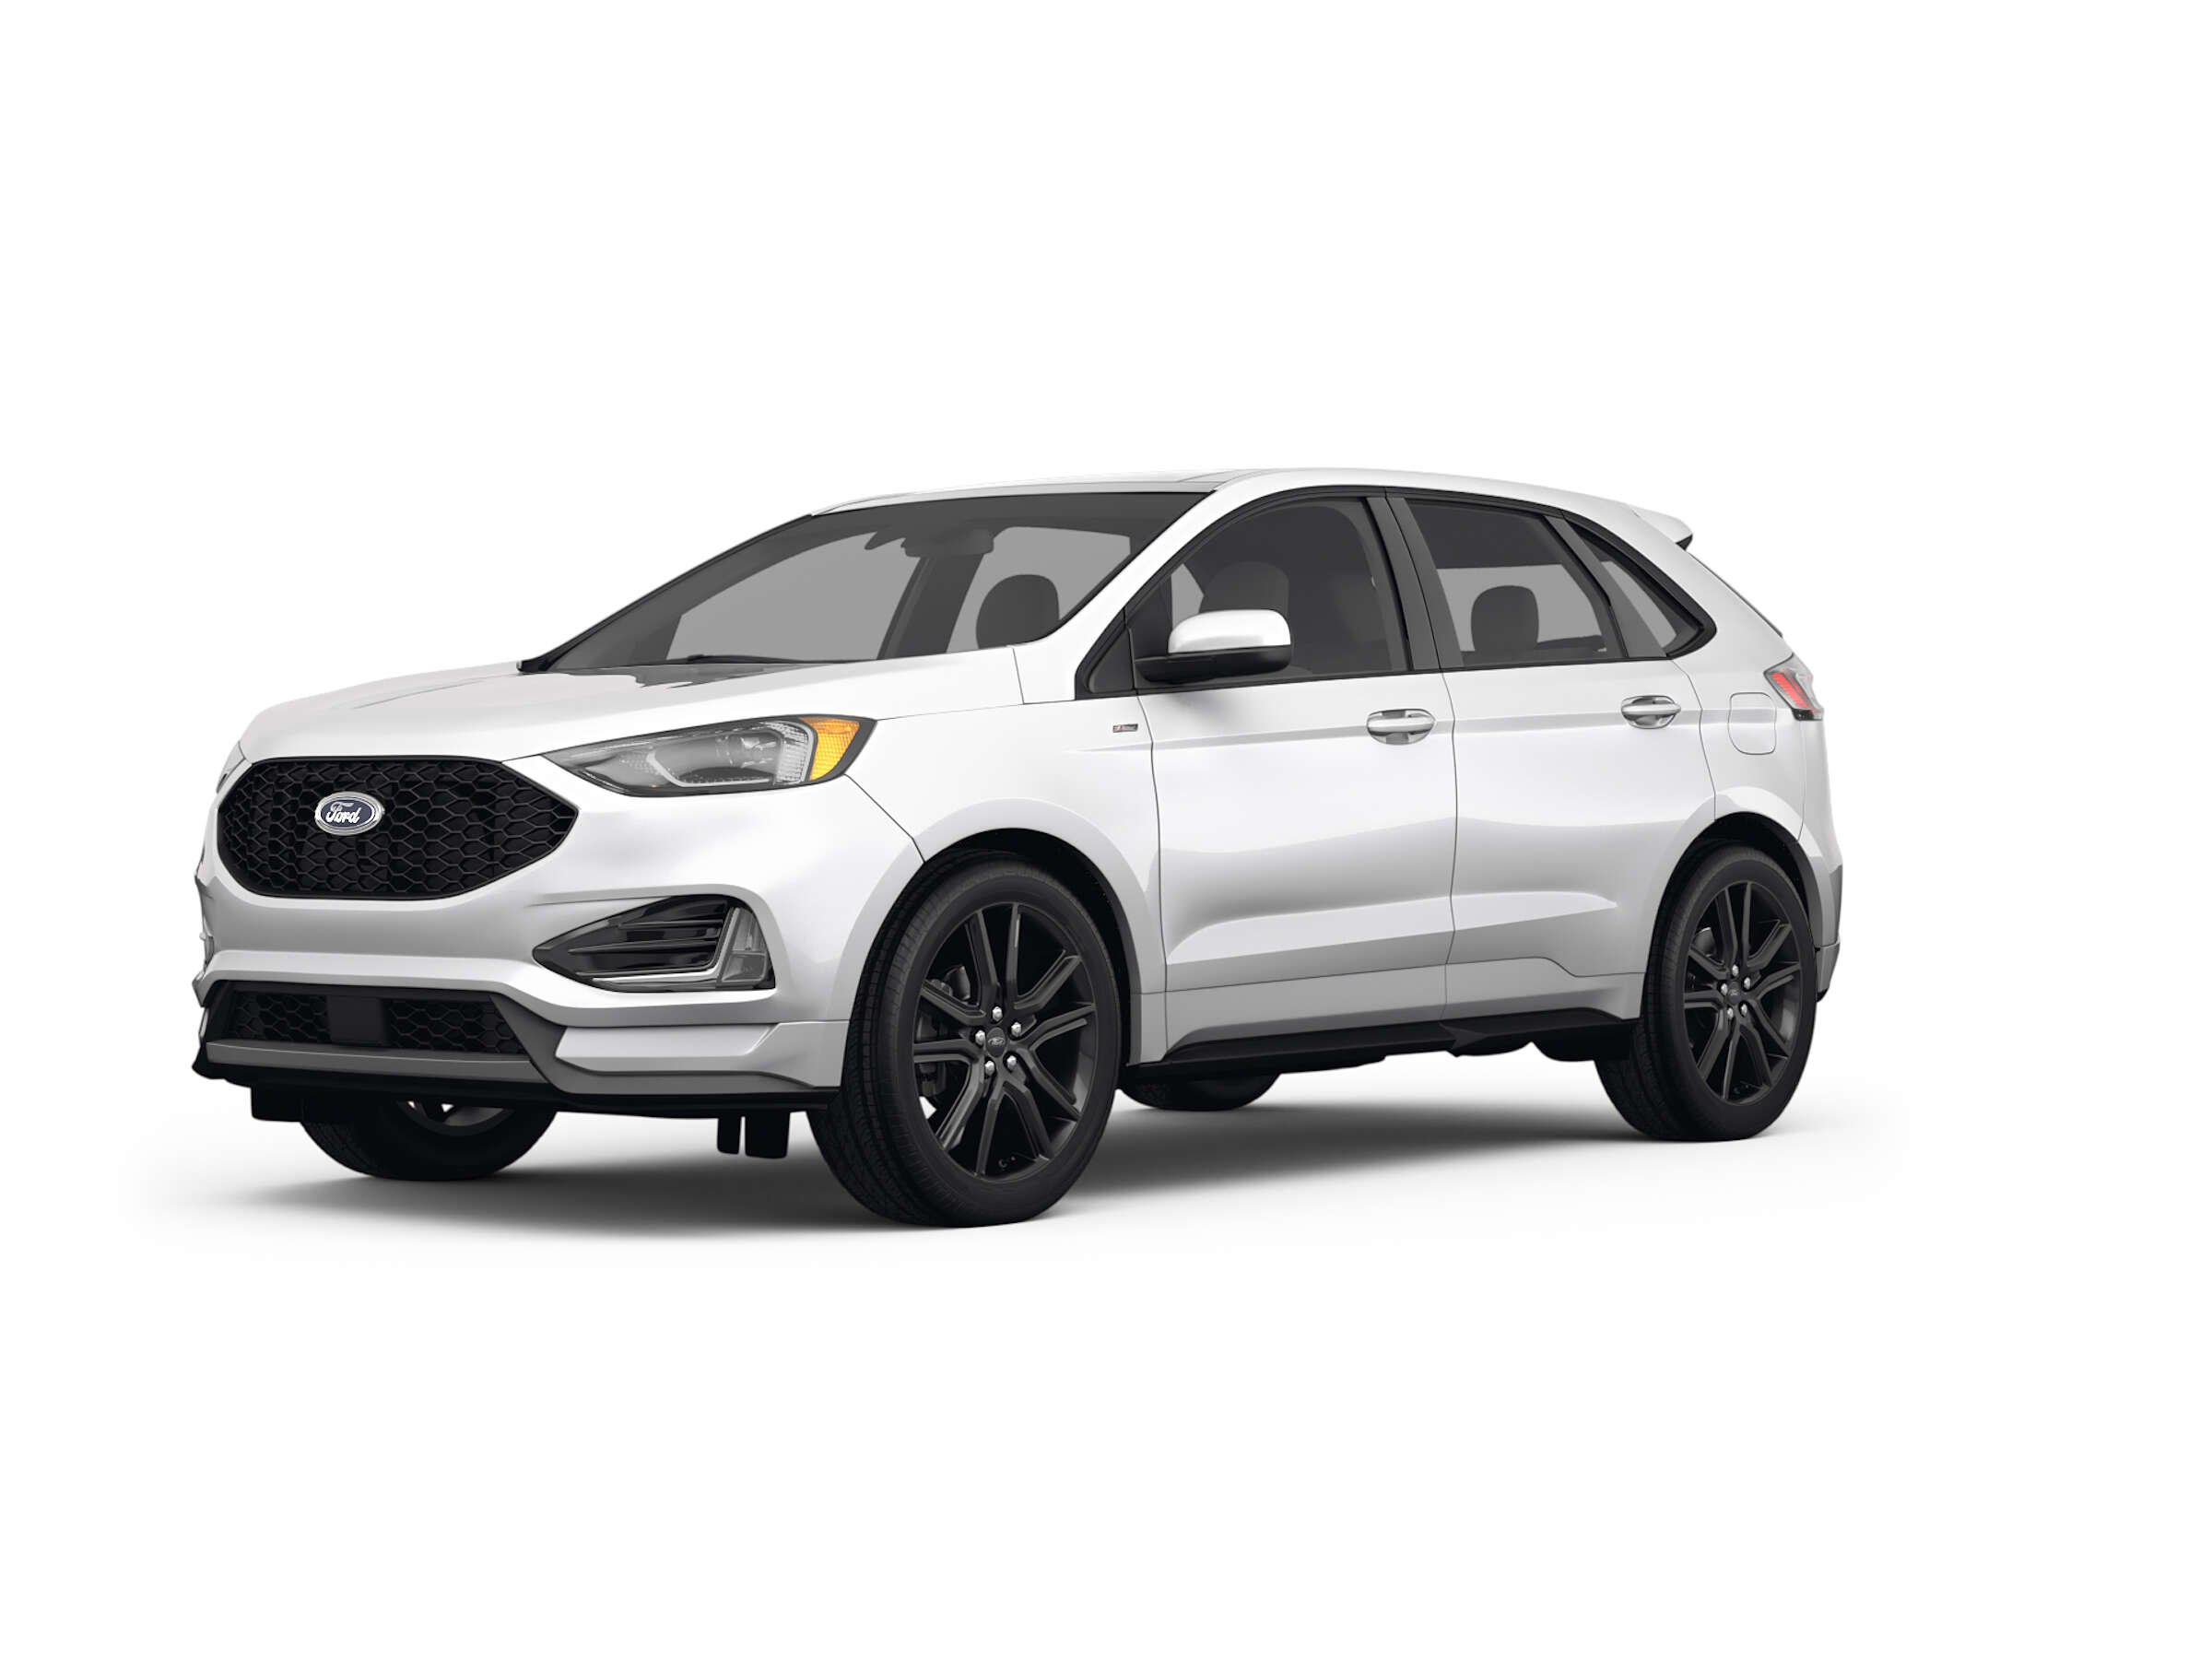 Ford Edge for sale in Murfreesboro, Tennessee